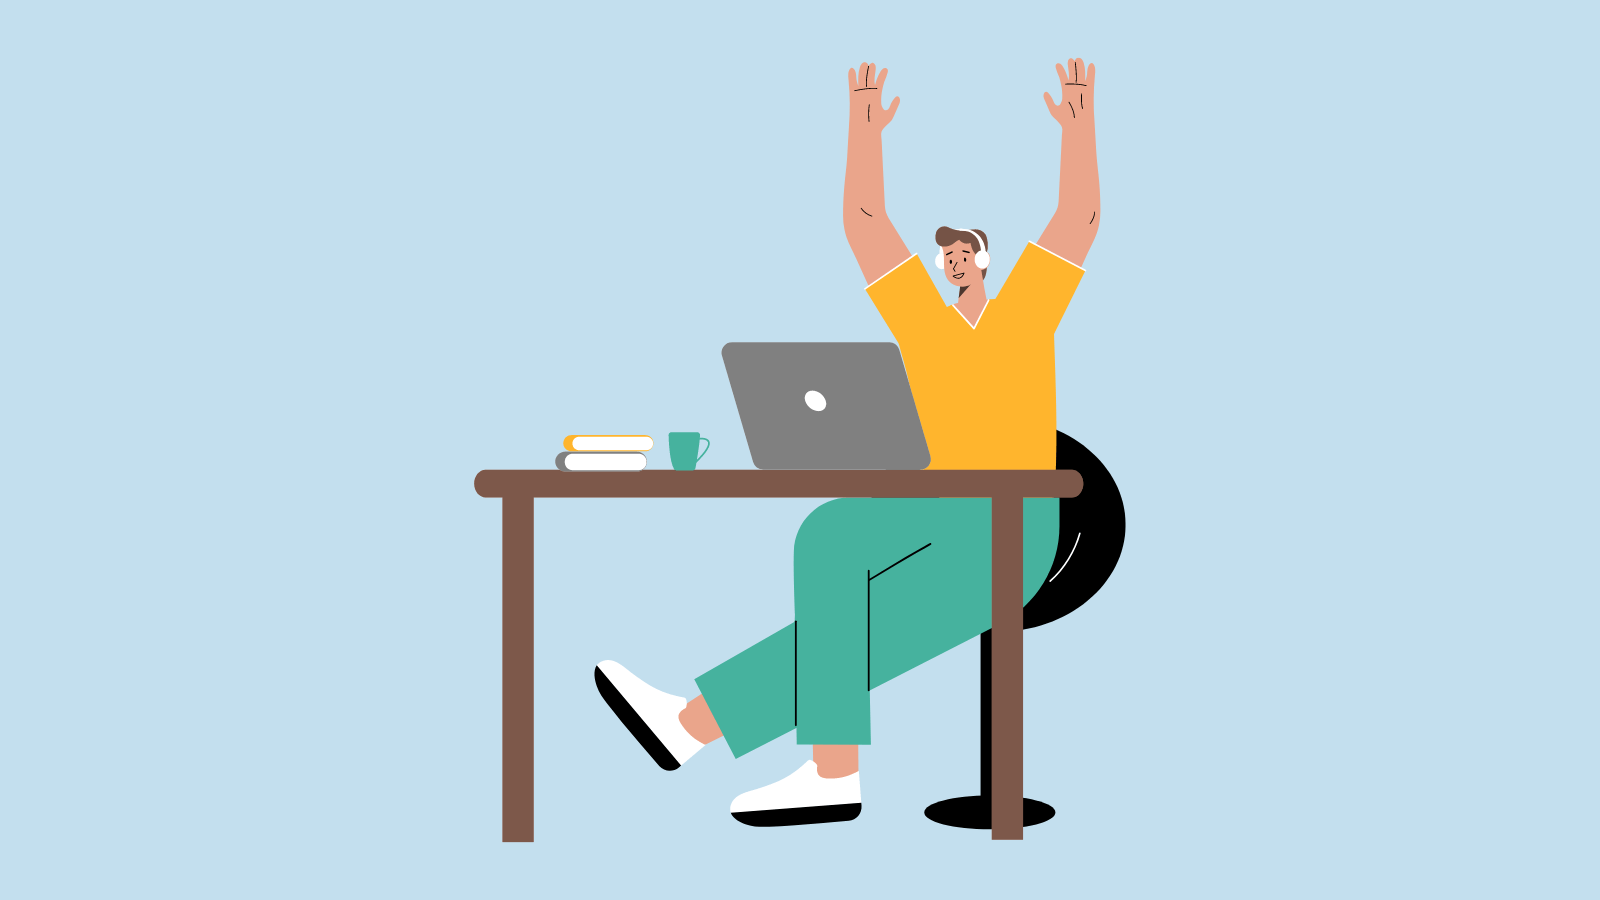 A person sitting at a desk throwing their hands up in celebration